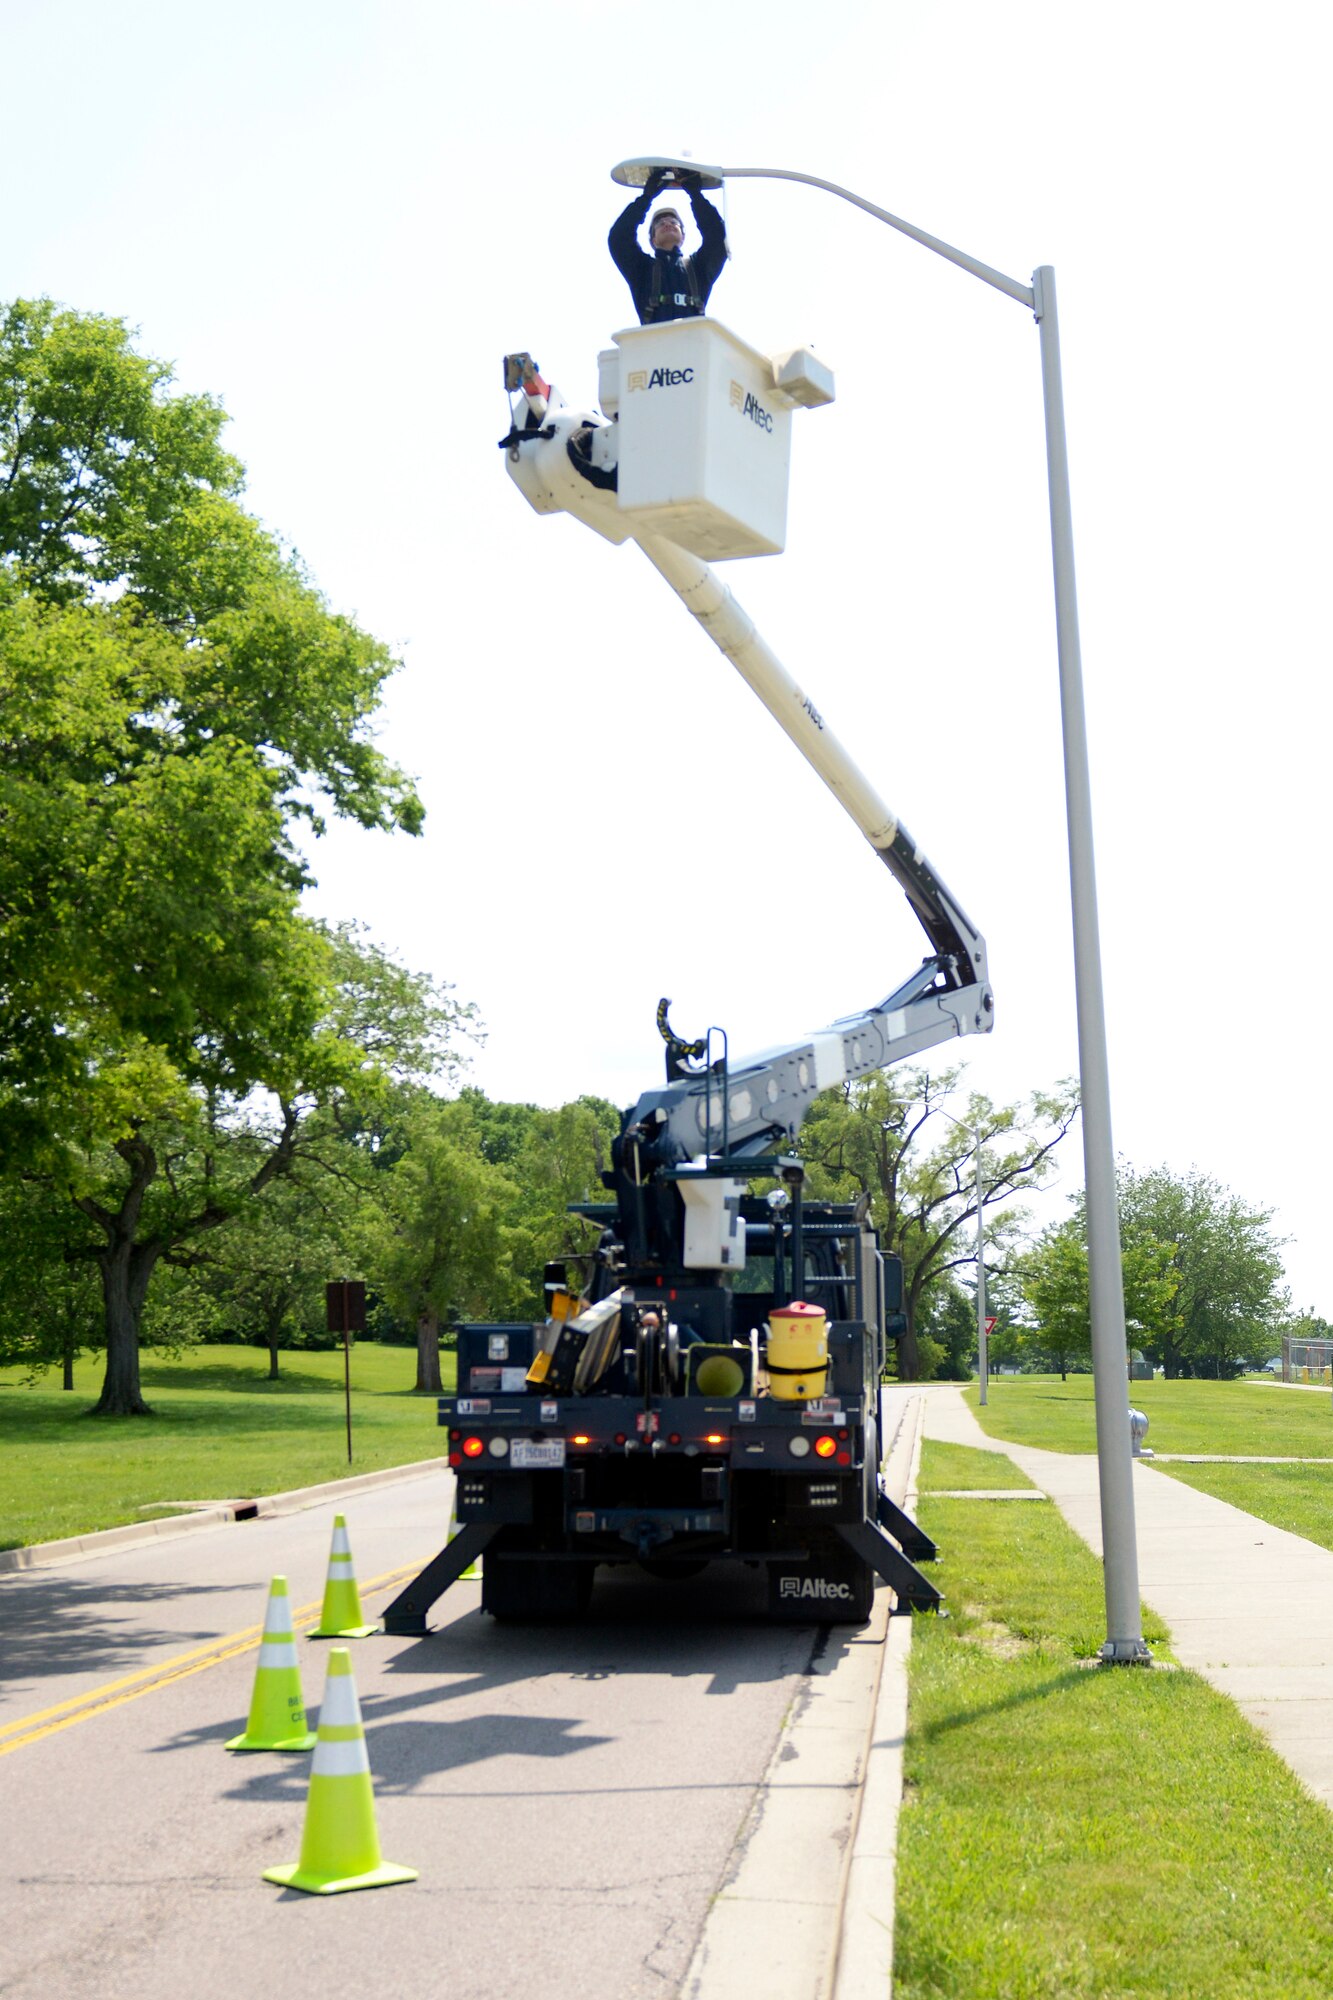 Senior Airman Michael A. Price, electrical systems journeyman, troubleshoots an LED street light June 2, 2019 at Wright-Patterson Air Force Base. The 445th CES electrical shop routinely performs inspections and maintenance on base facilities as a way to support the 88th Air Base Wing